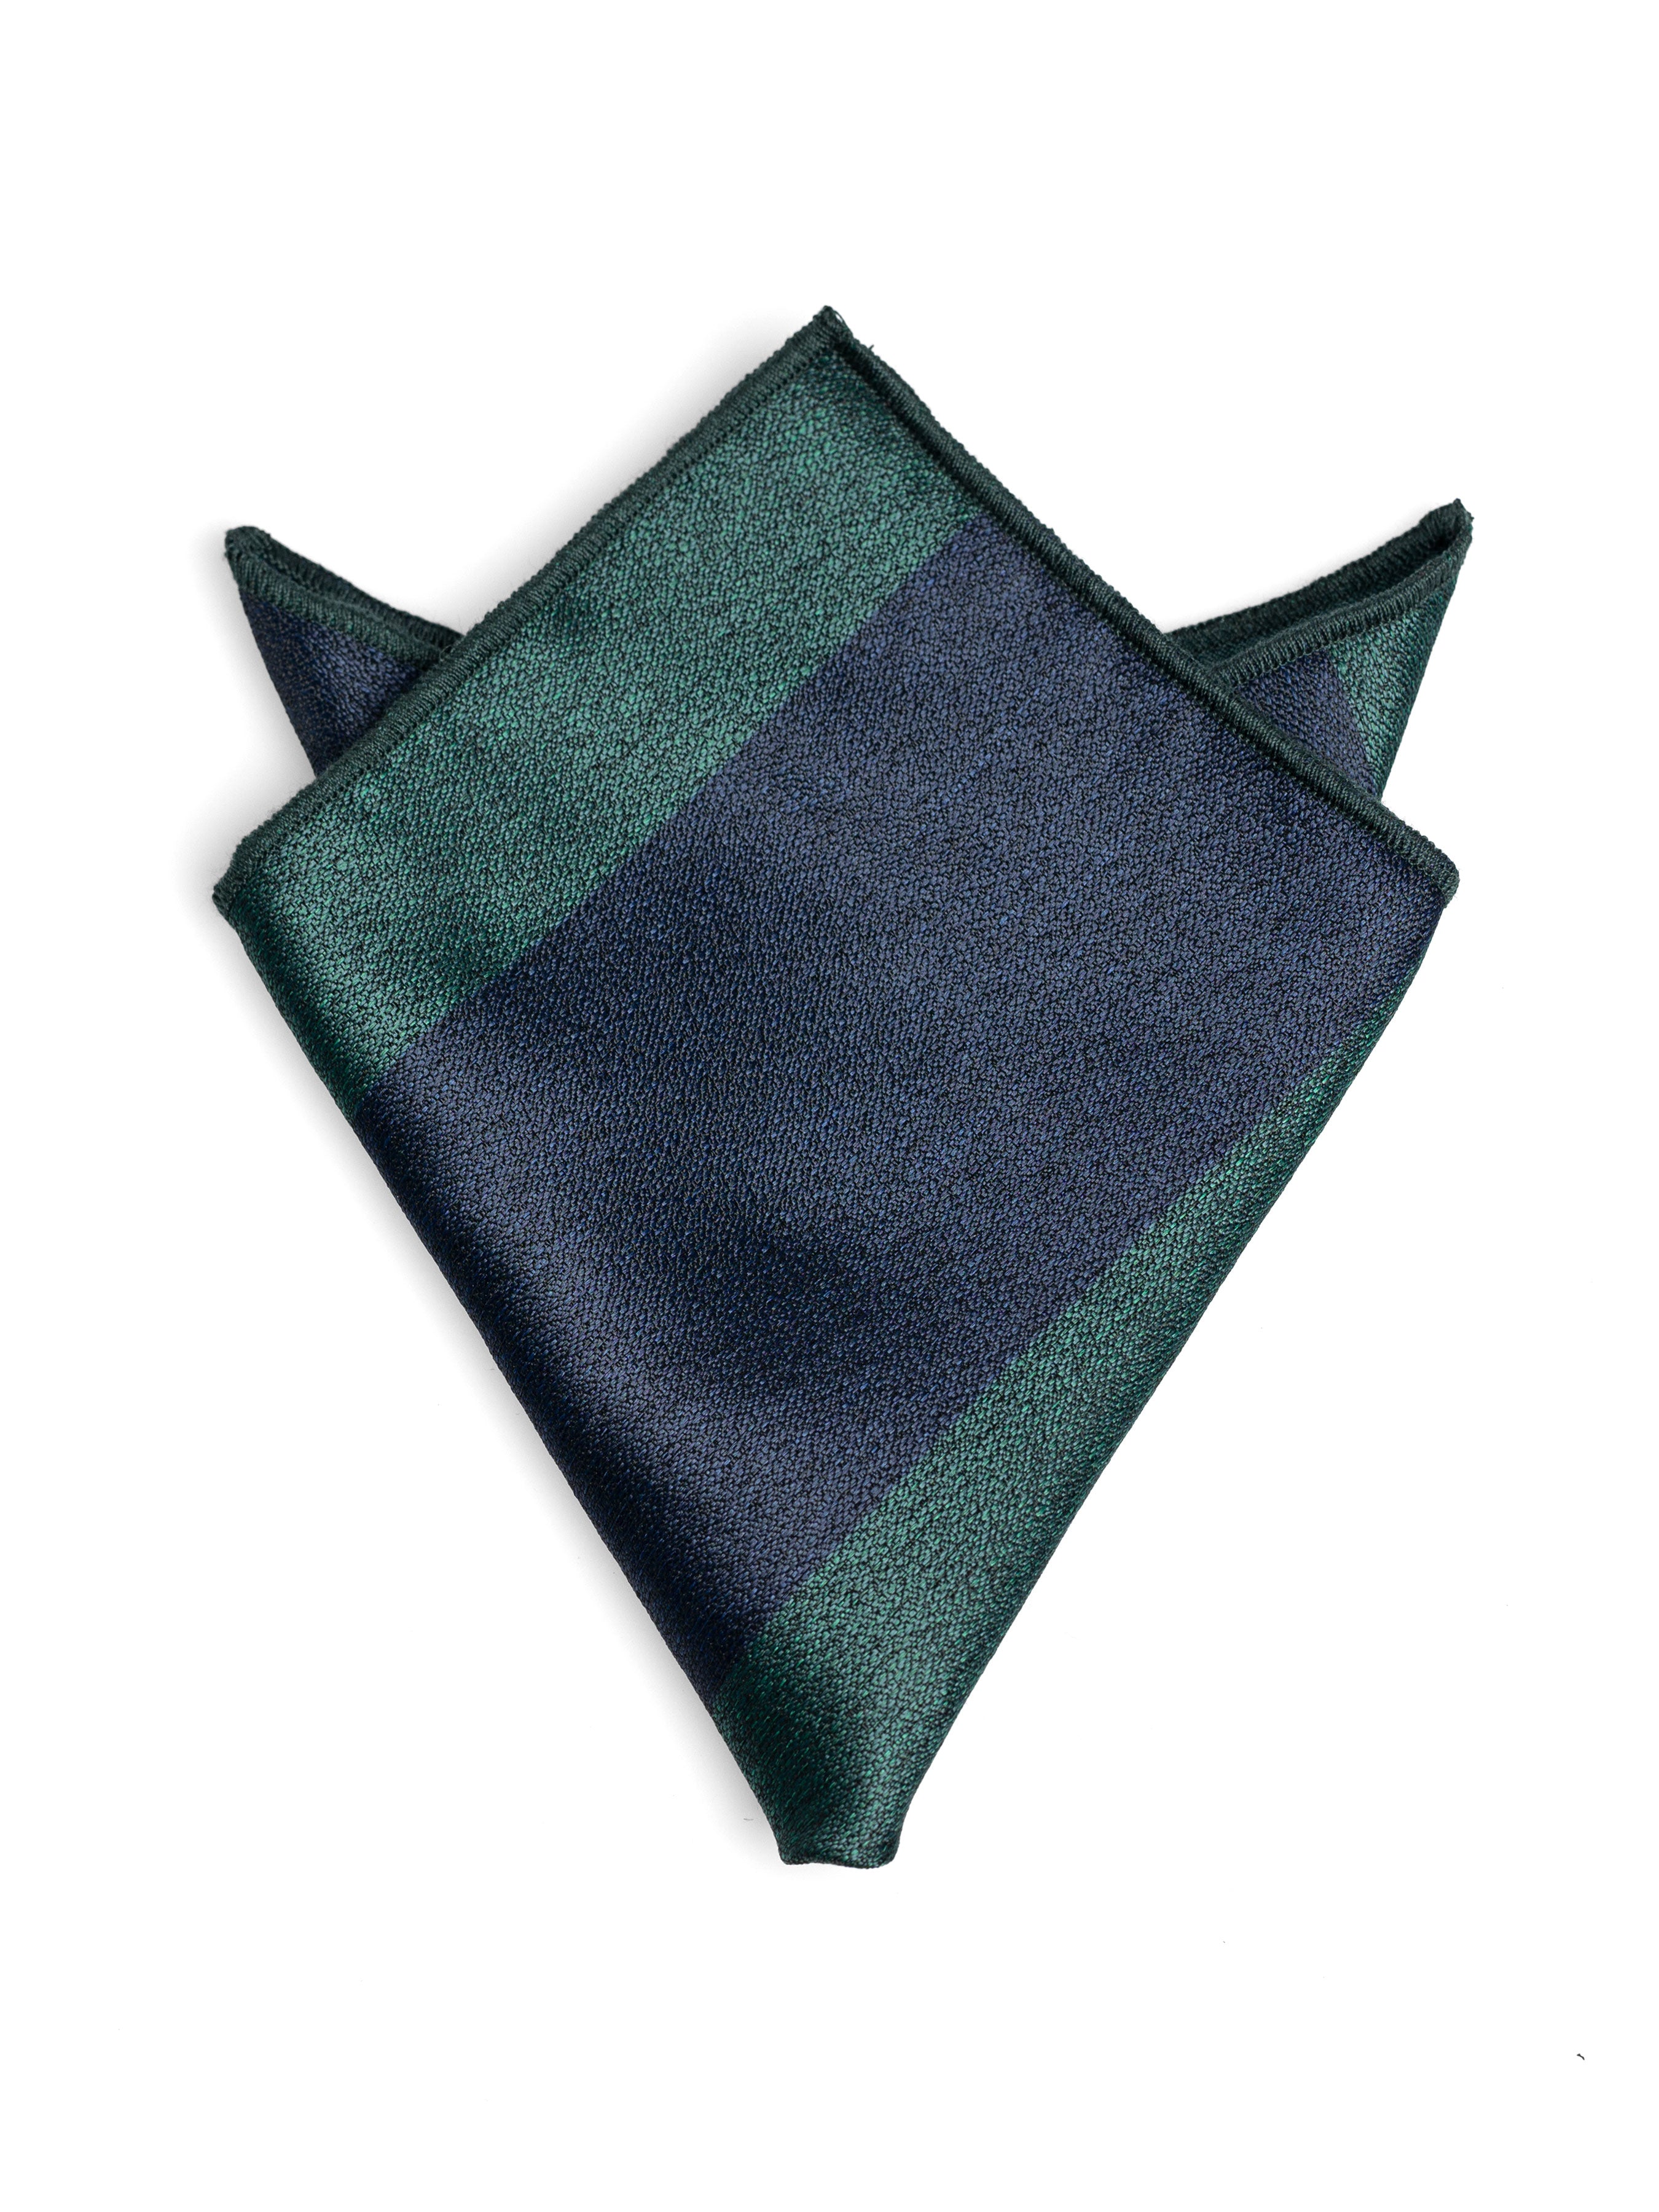 Stripe Pocket Square - Emerald Green with Blue Line - Zeve Shoes